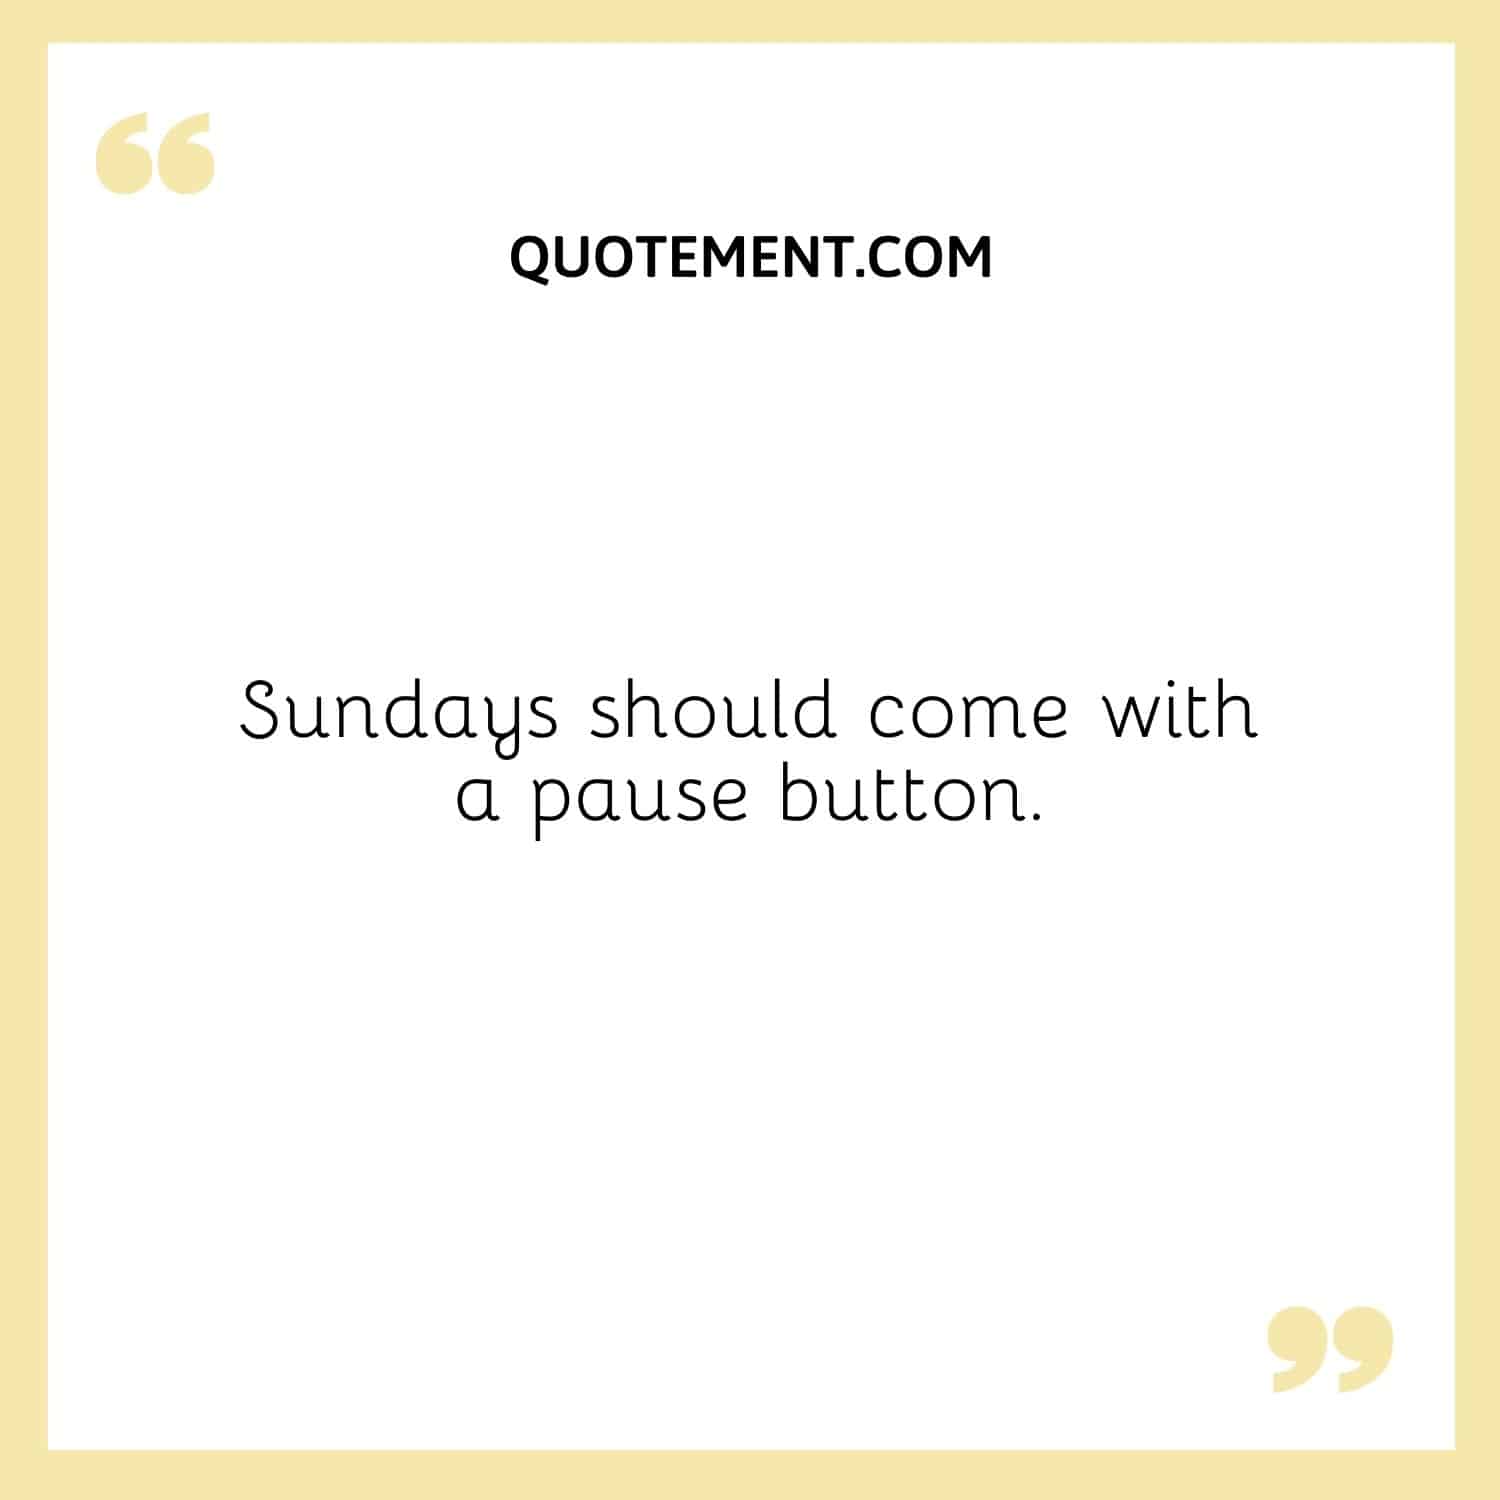 Sundays should come with a pause button.